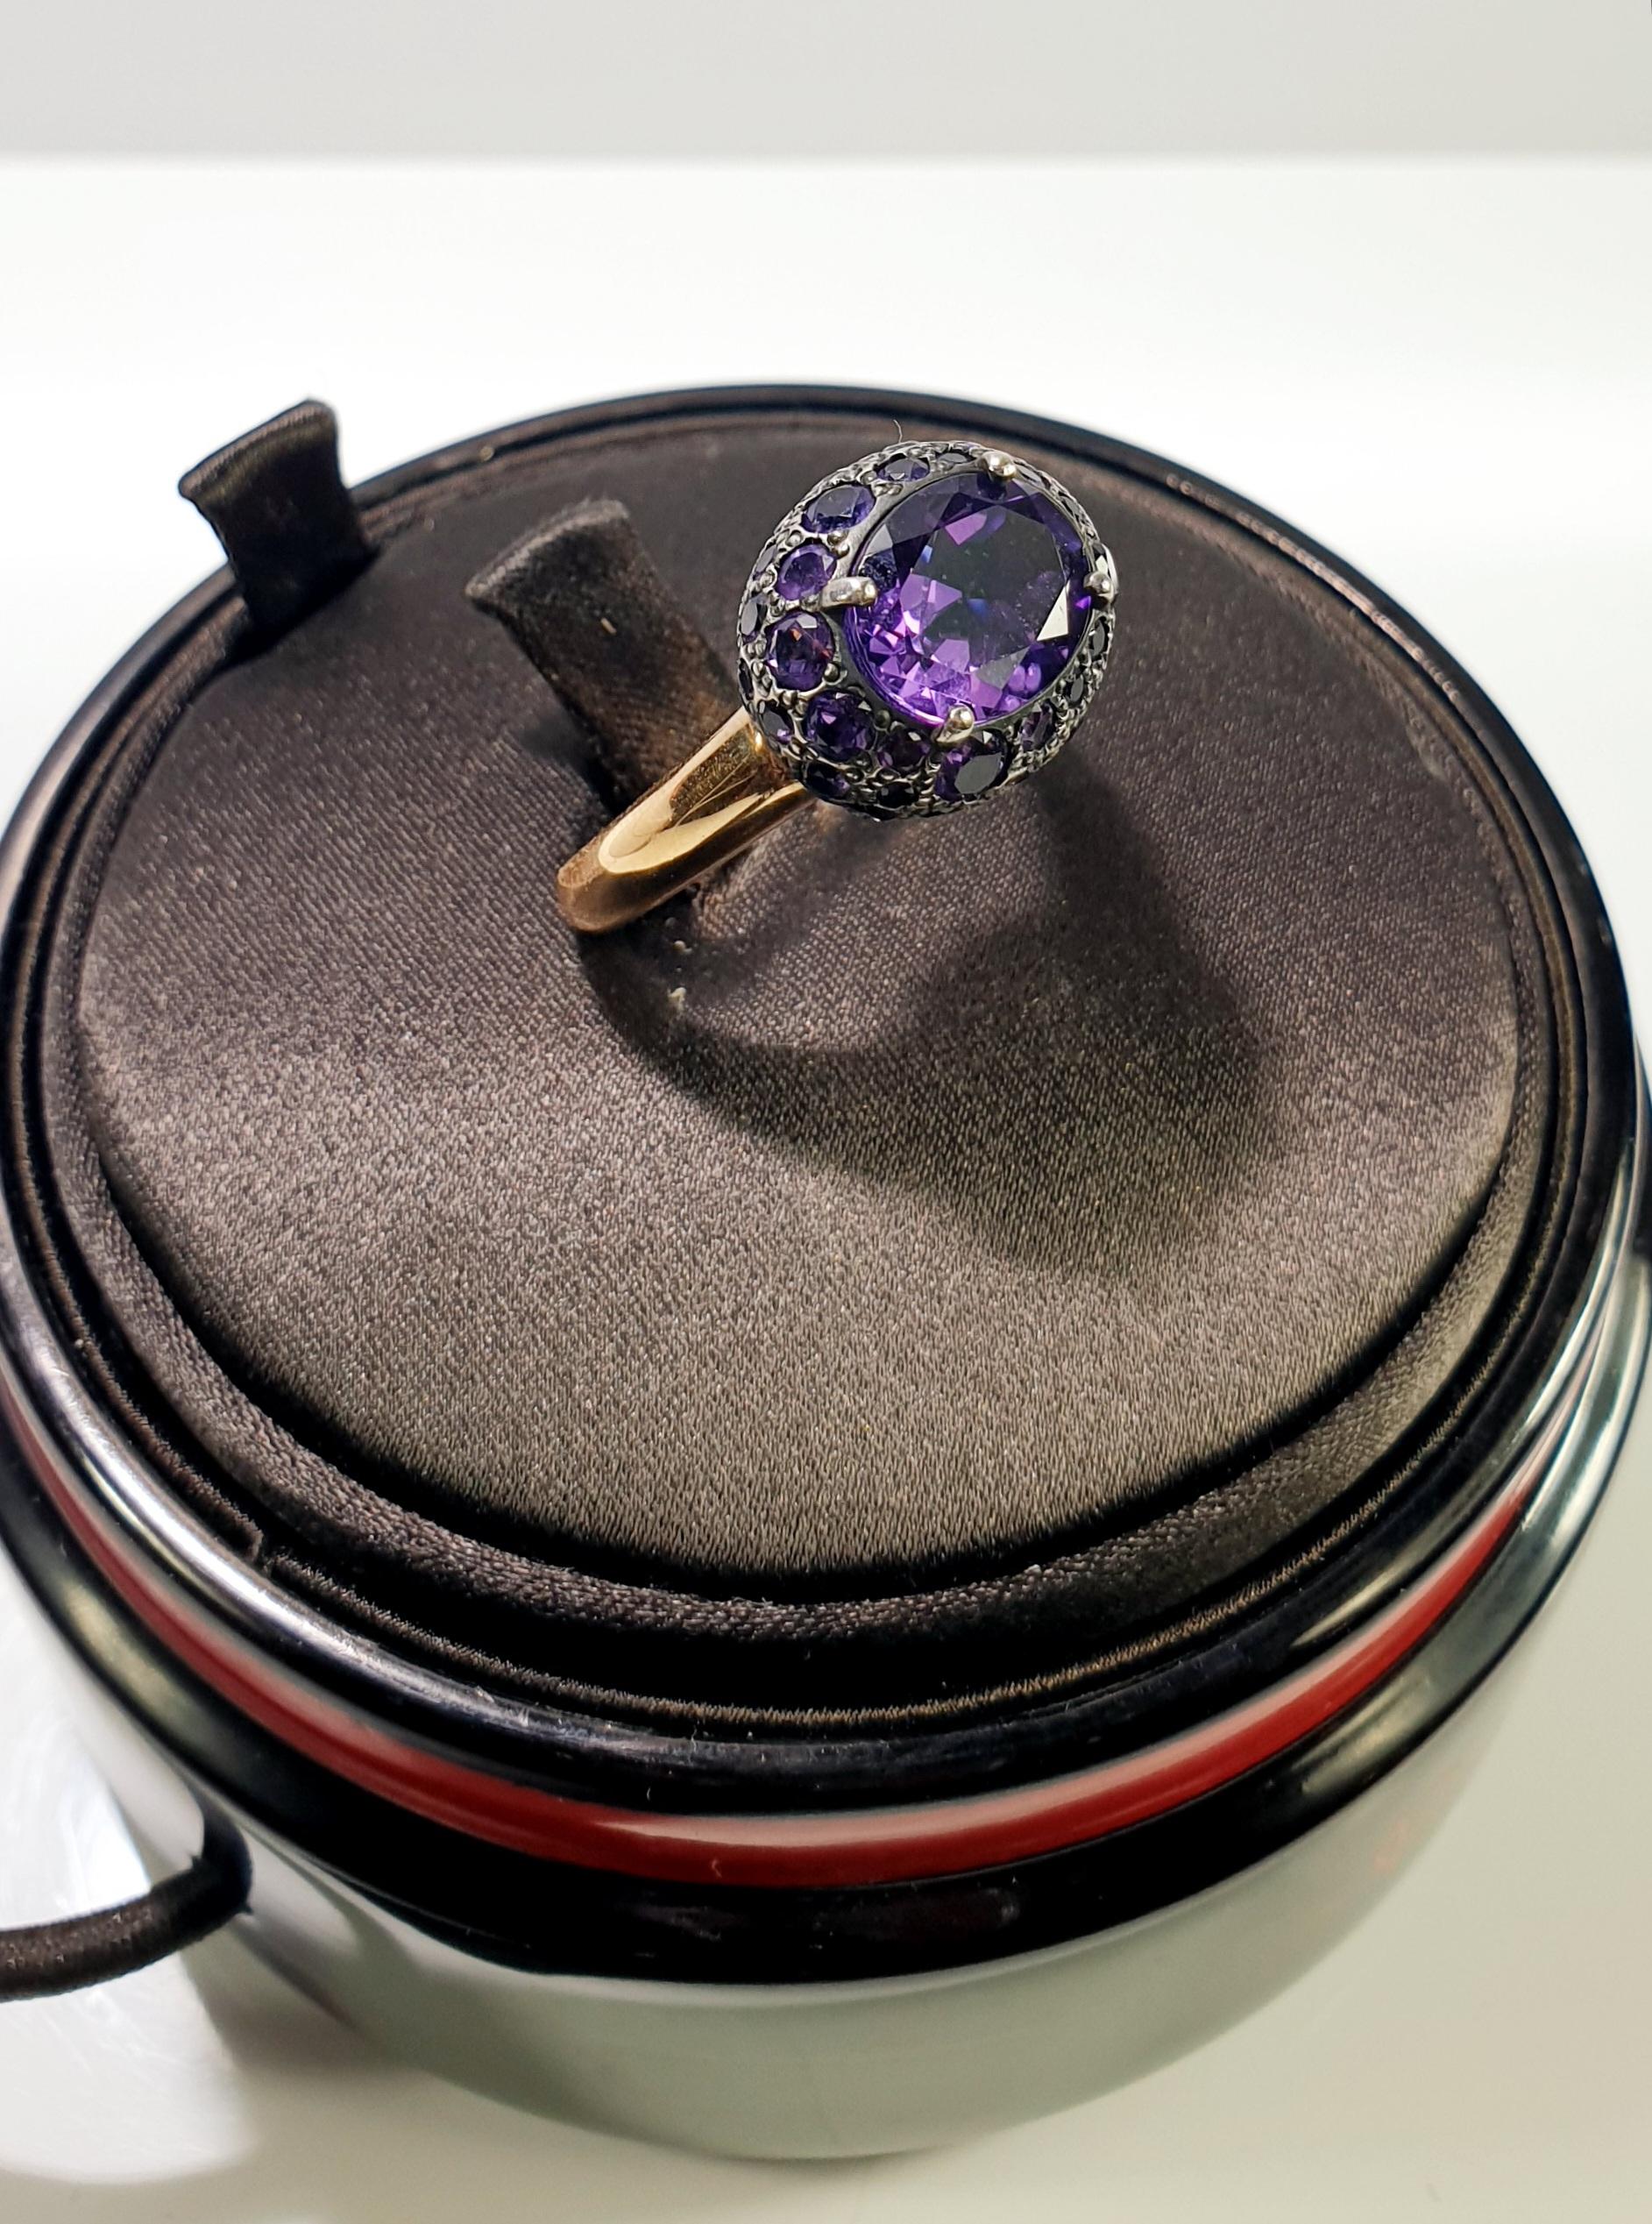 Pomellato Tabou Amethyst trimmed with smaller amethysts in 18 Karat Rose Gold Ring.
Ring Size Europe 55, 71/4 USA 
Also in Blue Topaz same size 

An intense, theatrical presence and a touch of history that make for a grand personality, Tabou is a